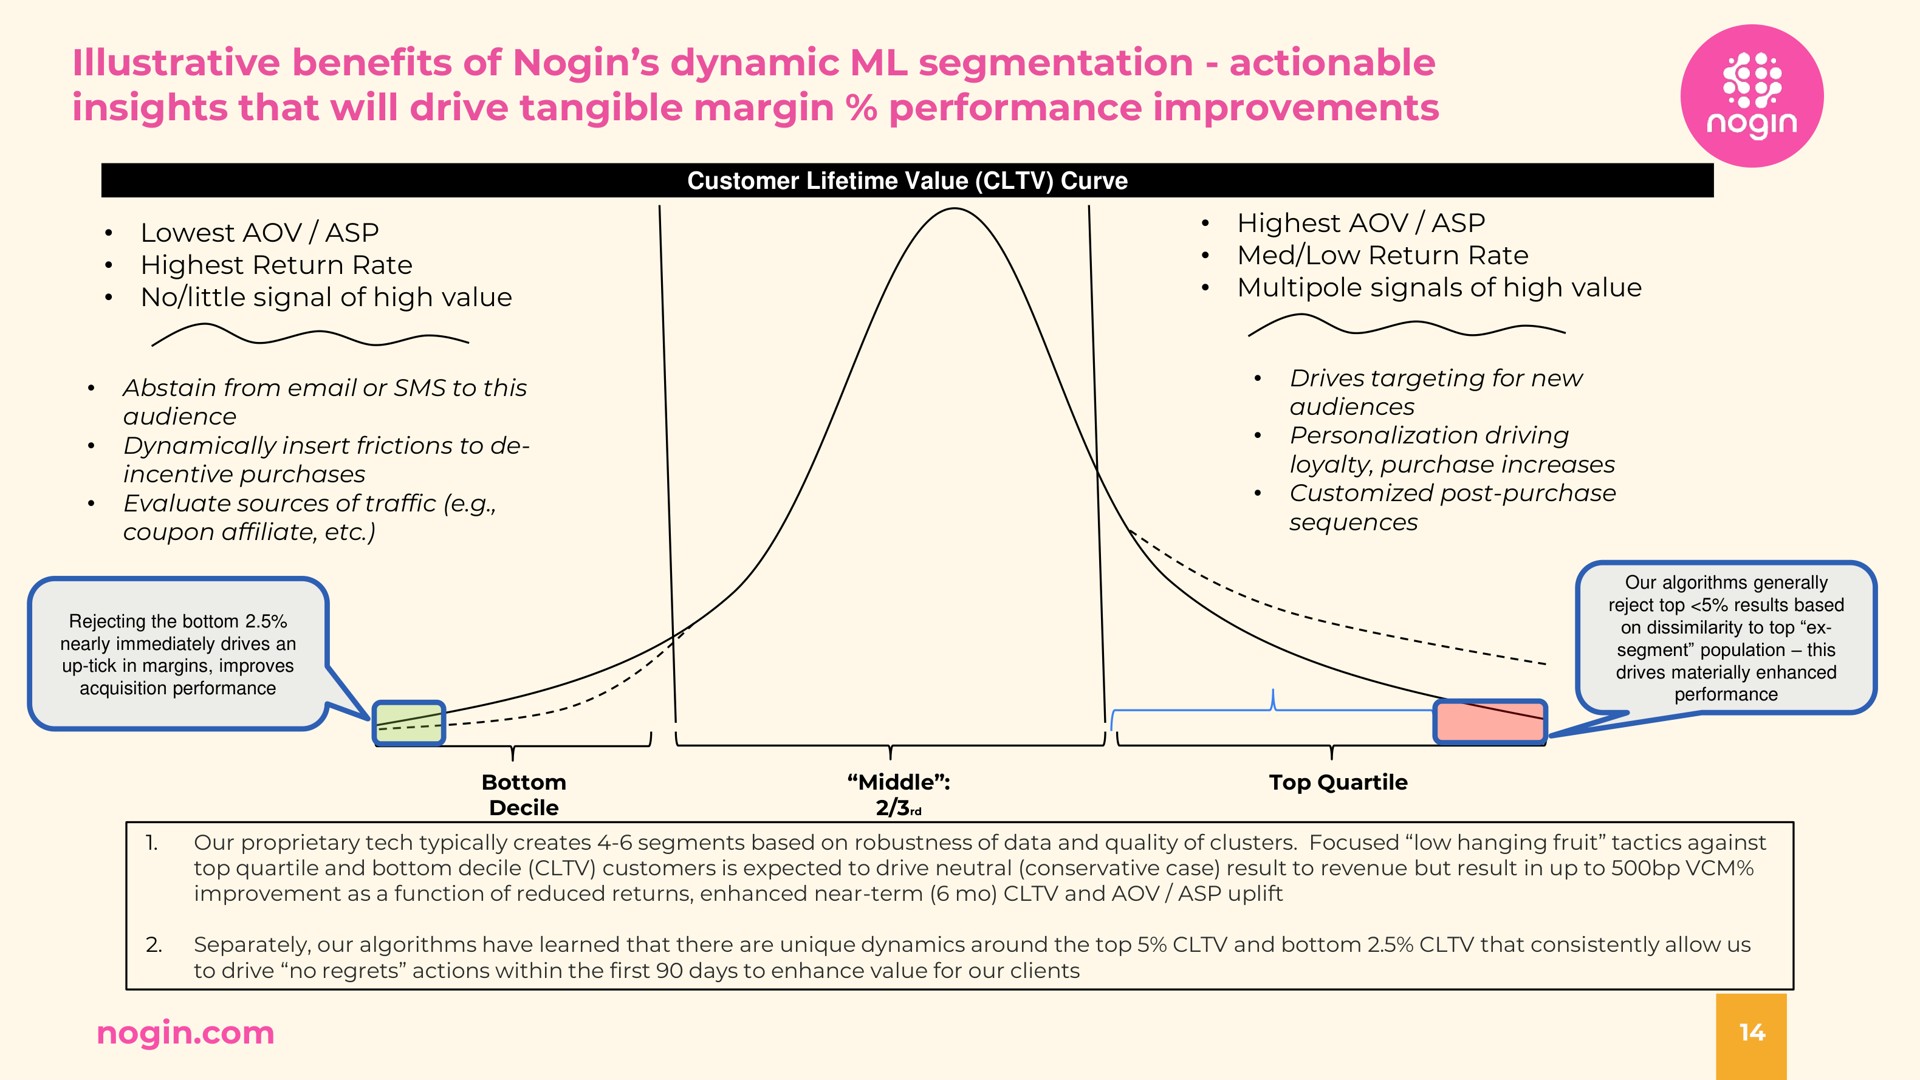 illustrative benefits of dynamic segmentation actionable insights that will drive tangible margin performance improvements | Nogin